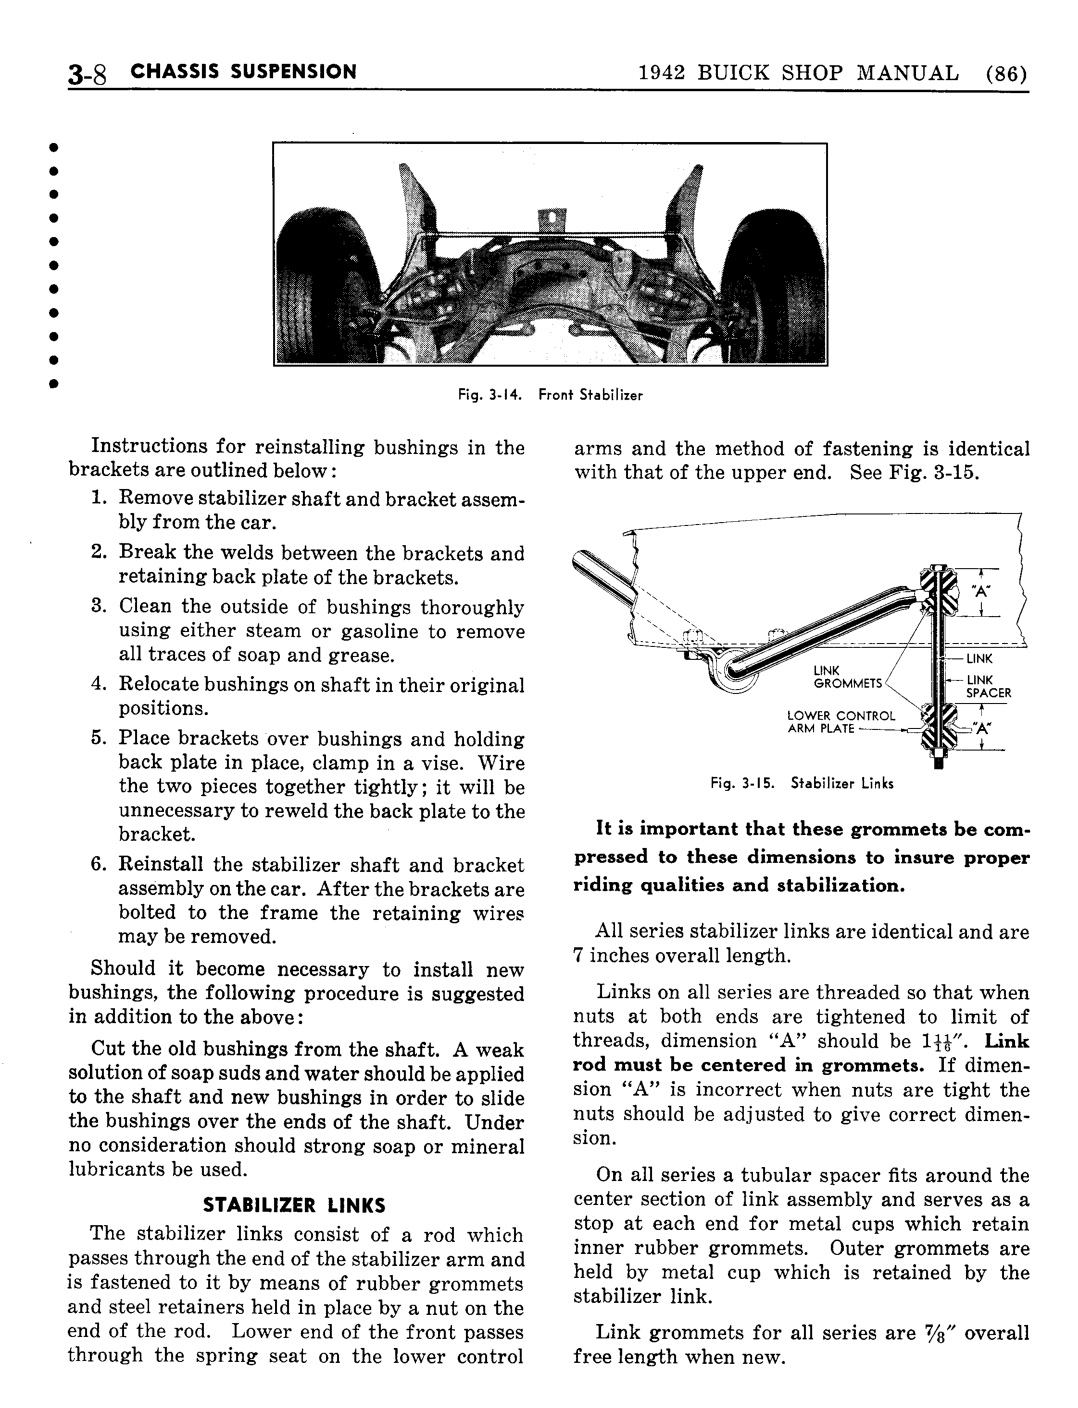 n_04 1942 Buick Shop Manual - Chassis Suspension-008-008.jpg